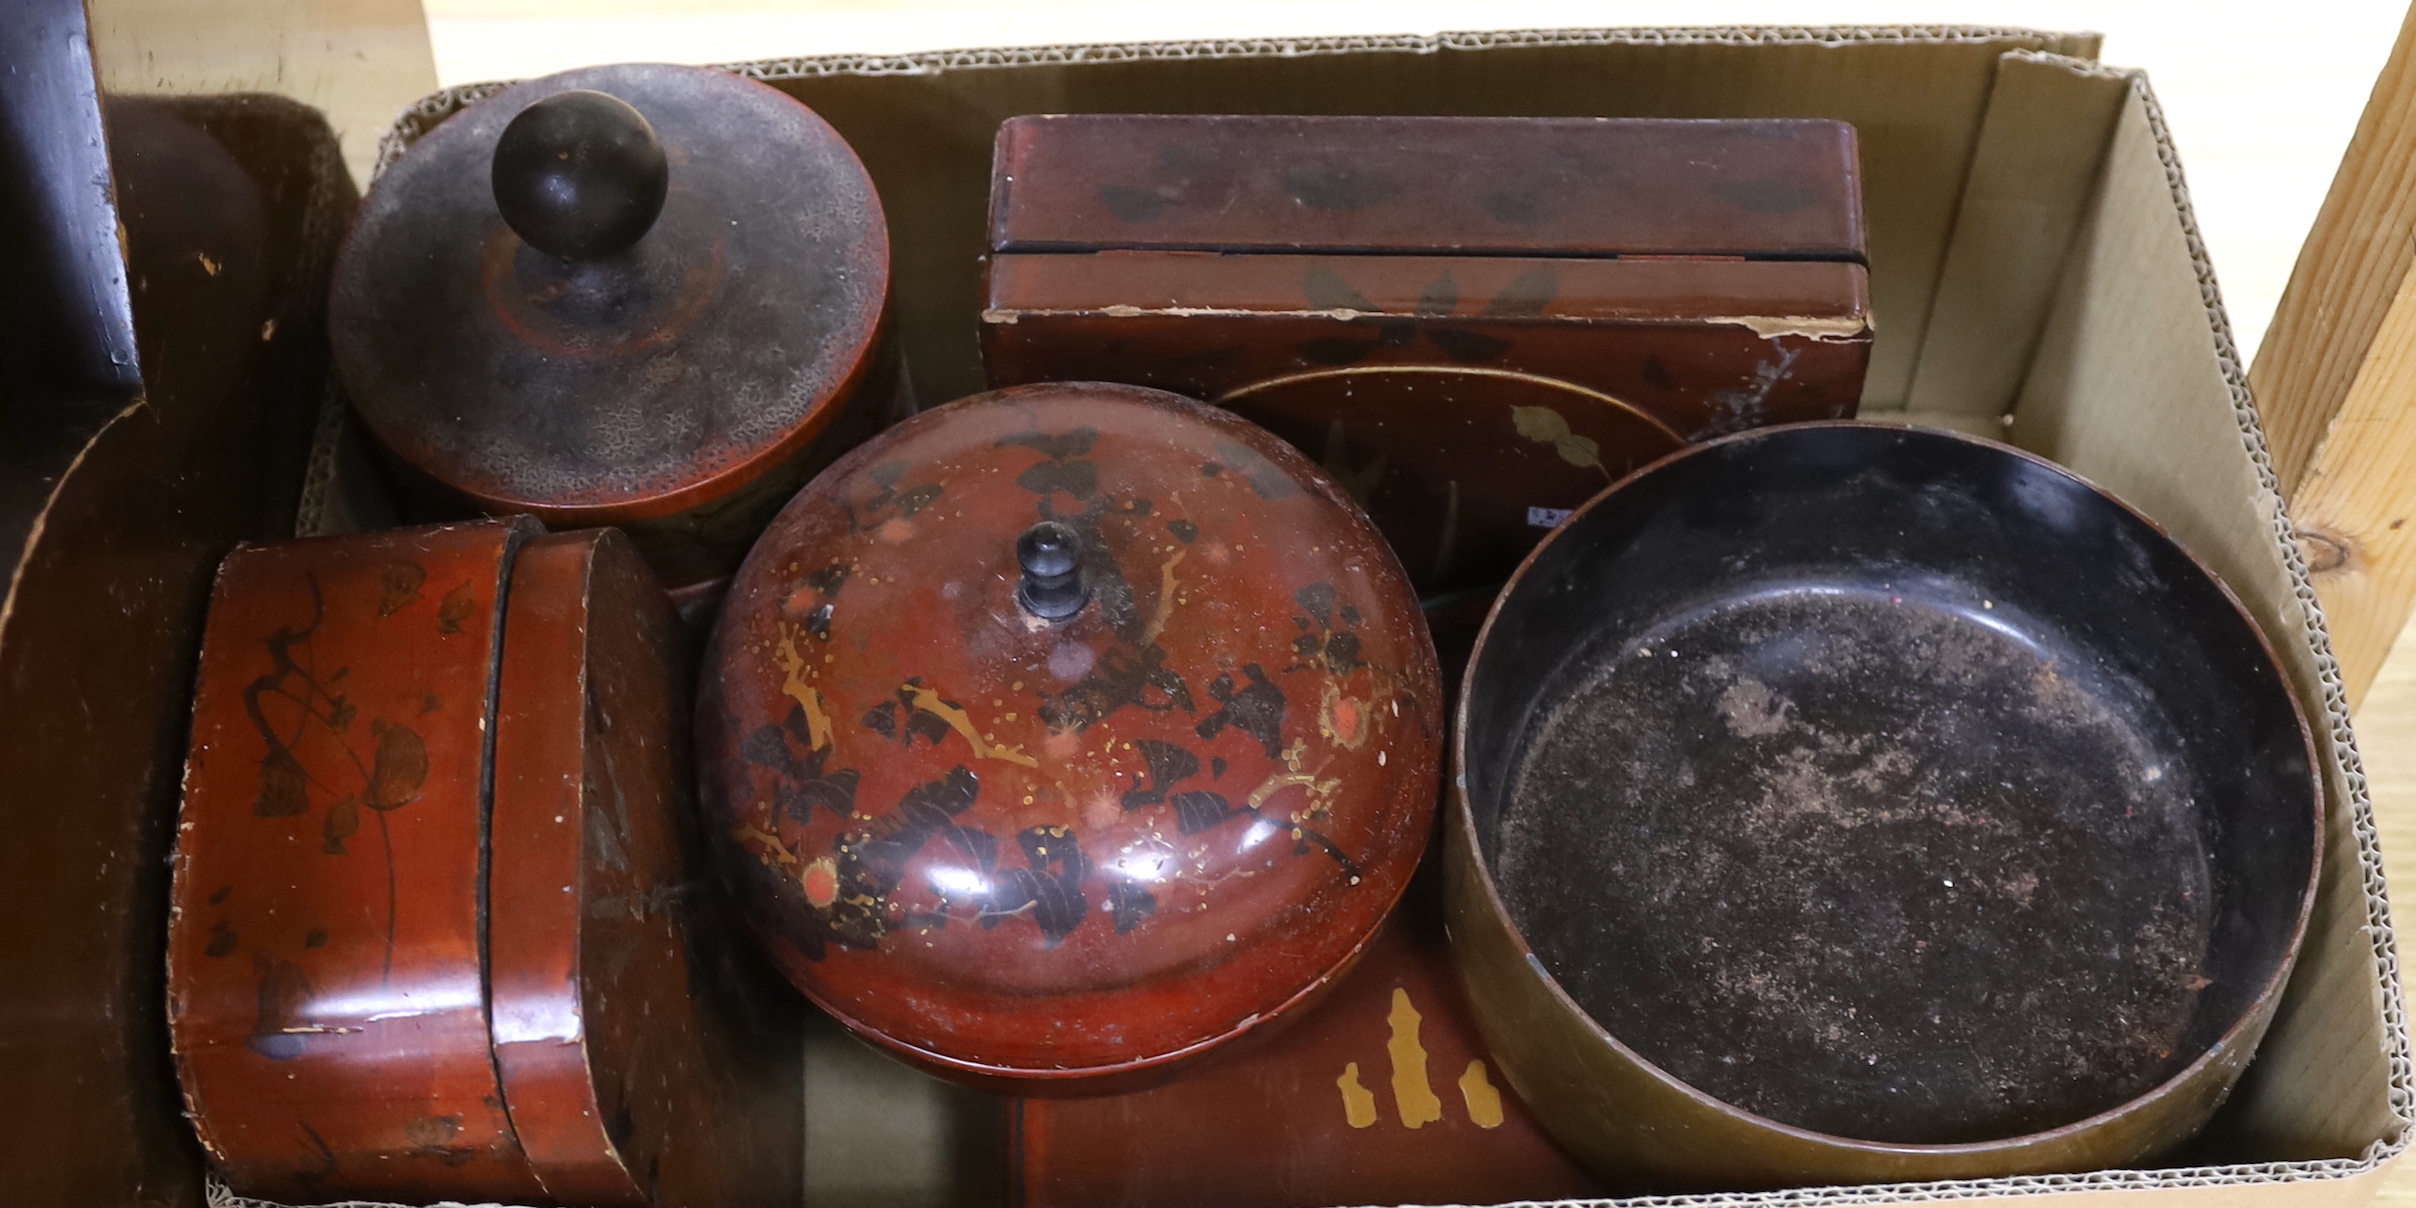 A quantity of assorted lacquer ware boxes, trays etc.